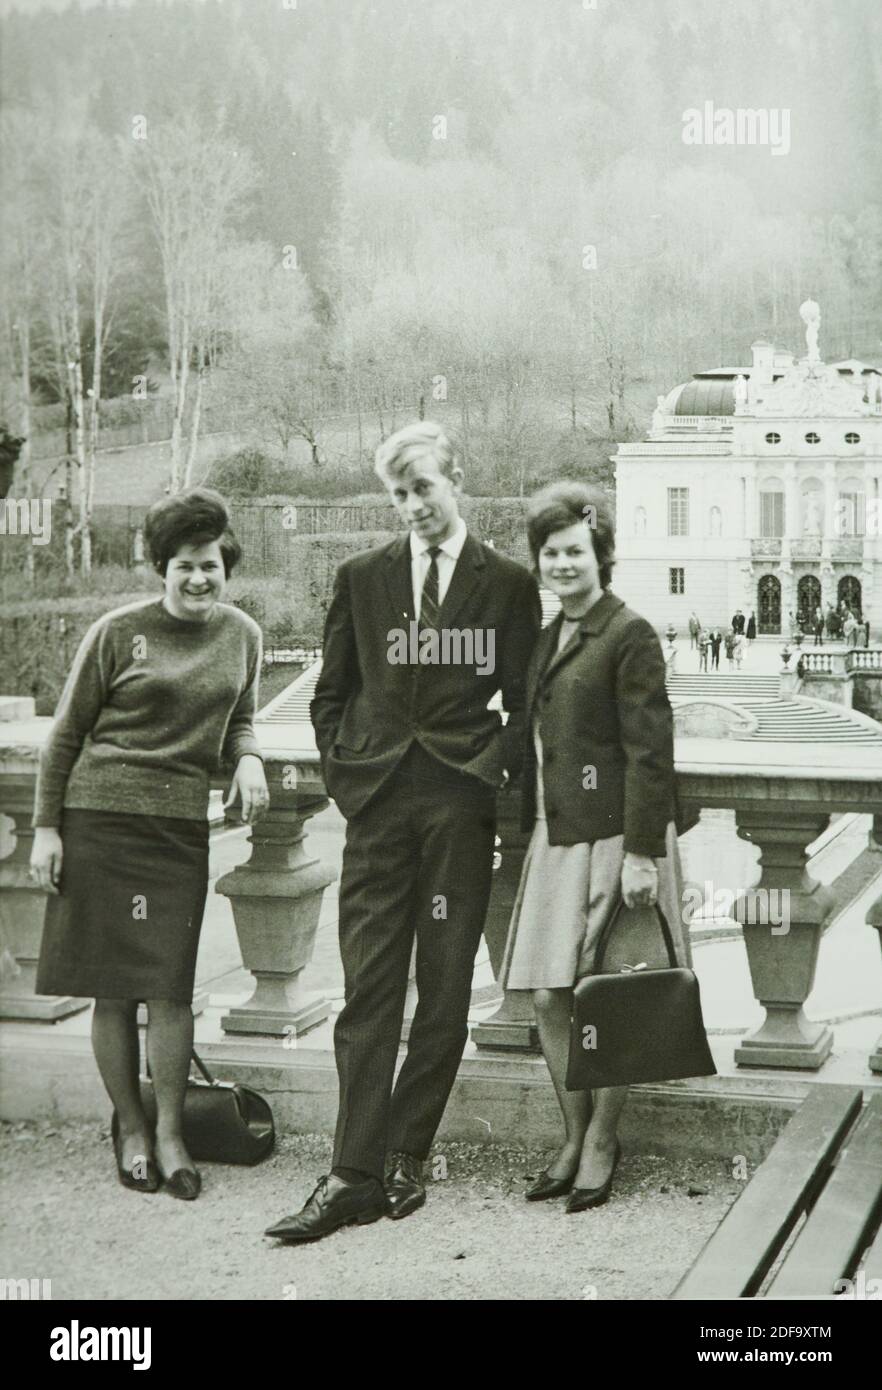 Historical Photo:  Two woman and a man at Schloss Linderhof castle 1962 in Oberammergau, Germany. Reproduction in Marktoberdorf, Germany, October 26, 2020.  © Peter Schatz / Alamy Stock Photos Stock Photo